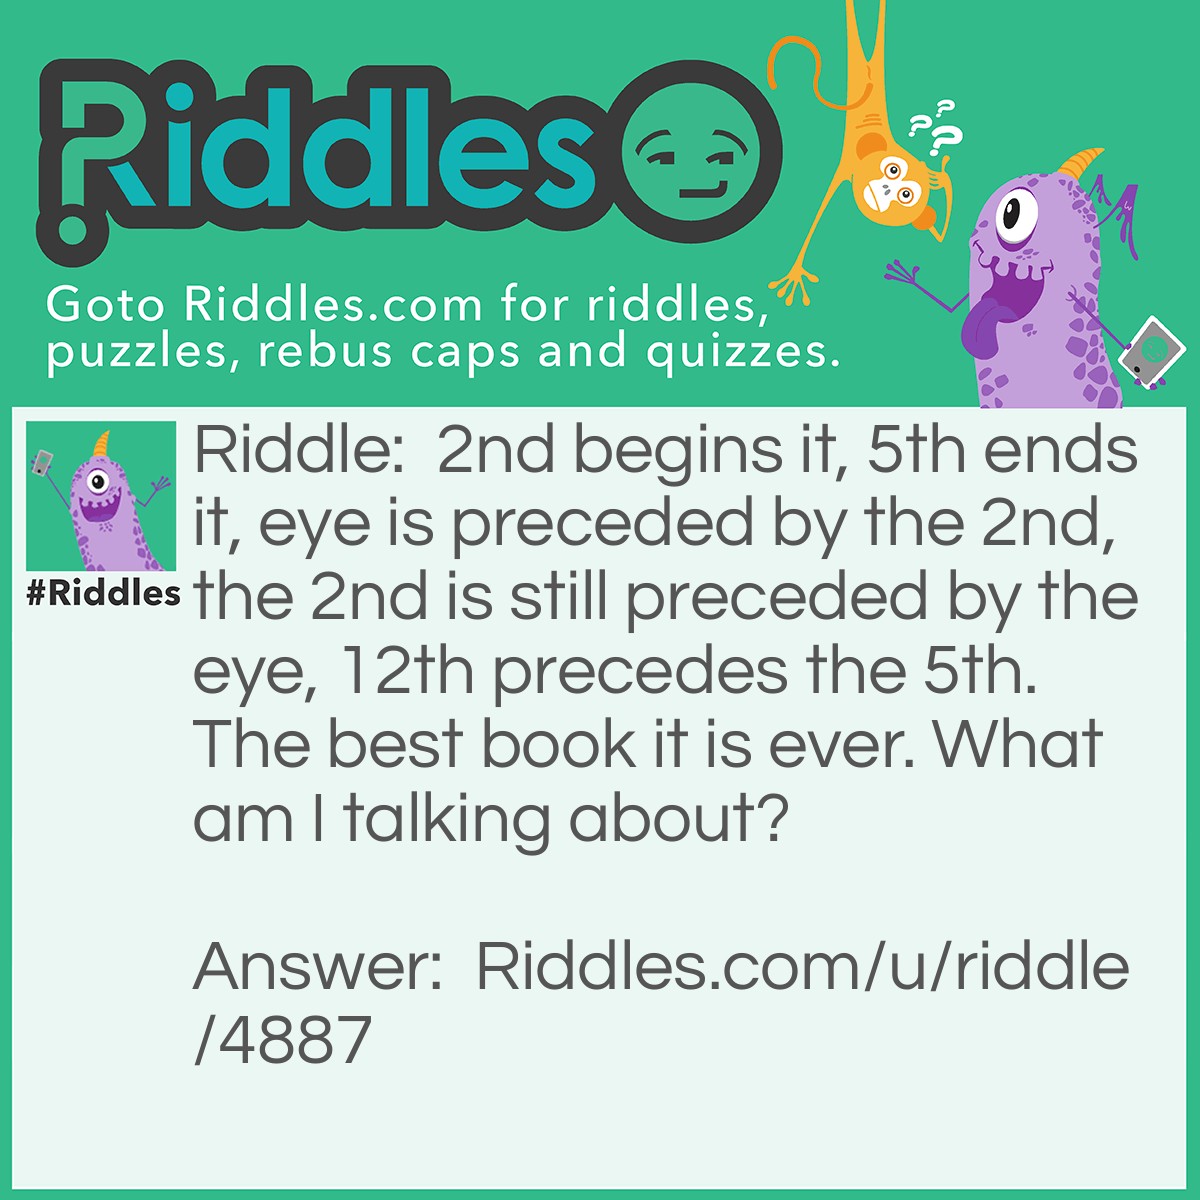 Riddle: 2nd begins it, 5th ends it, eye is preceded by the 2nd, the 2nd is still preceded by the eye, 12th precedes the 5th. The best book it is ever. What am I talking about? Answer: A Bible